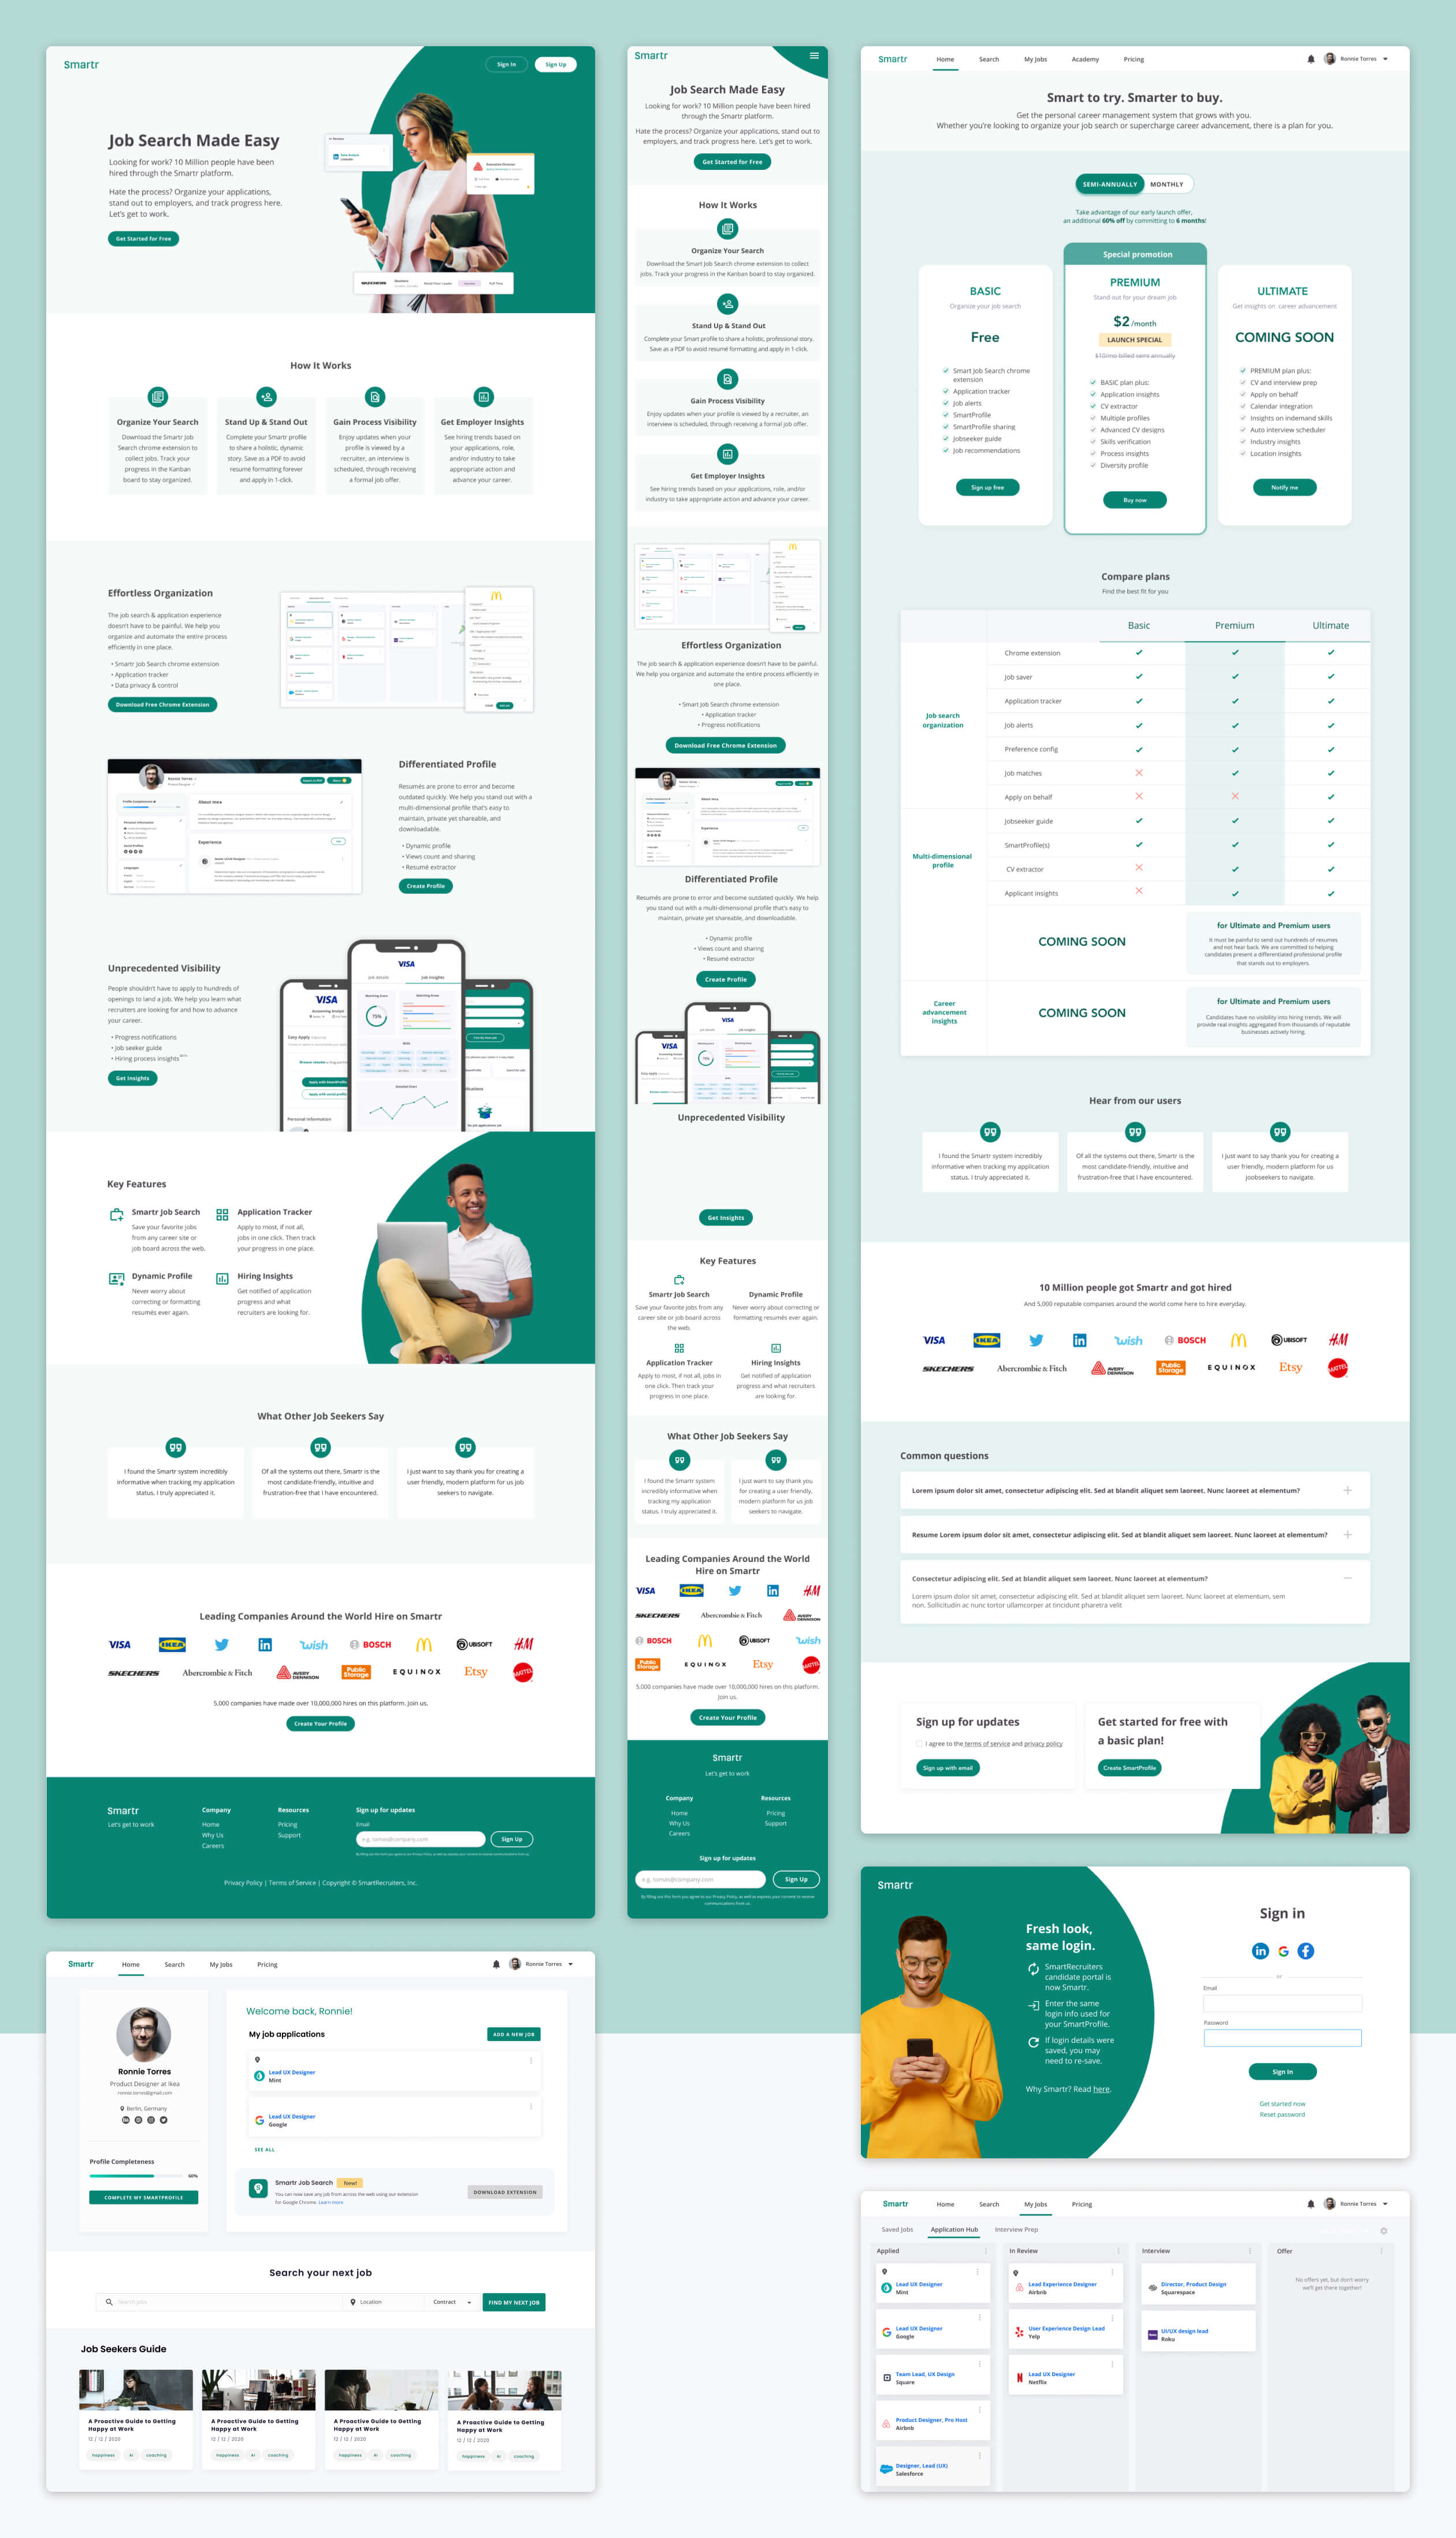 Final designed pages, including: homepage for desktop and for mobile, pricing page, profile page, login page and my jobs page